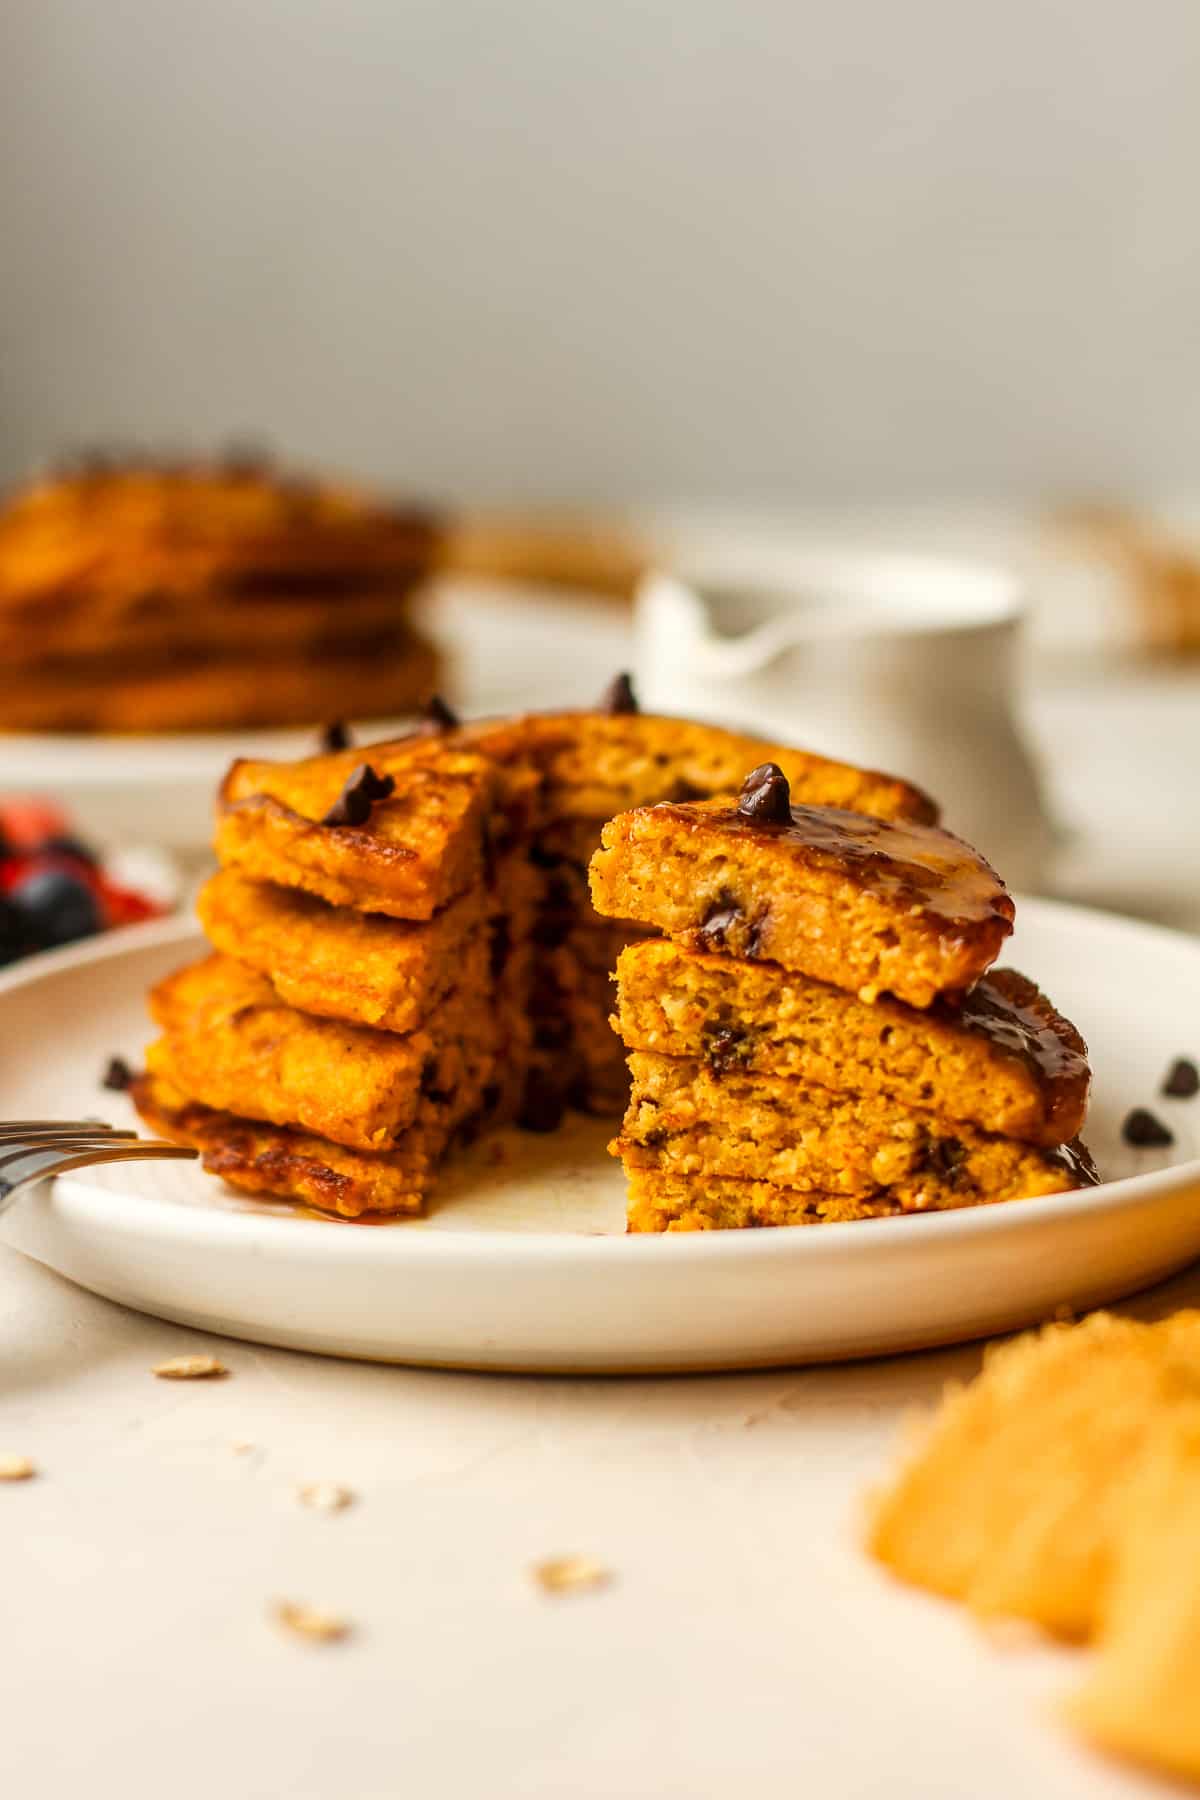 A plate of four pumpkin pancakes showing the insides with chocolate chips.